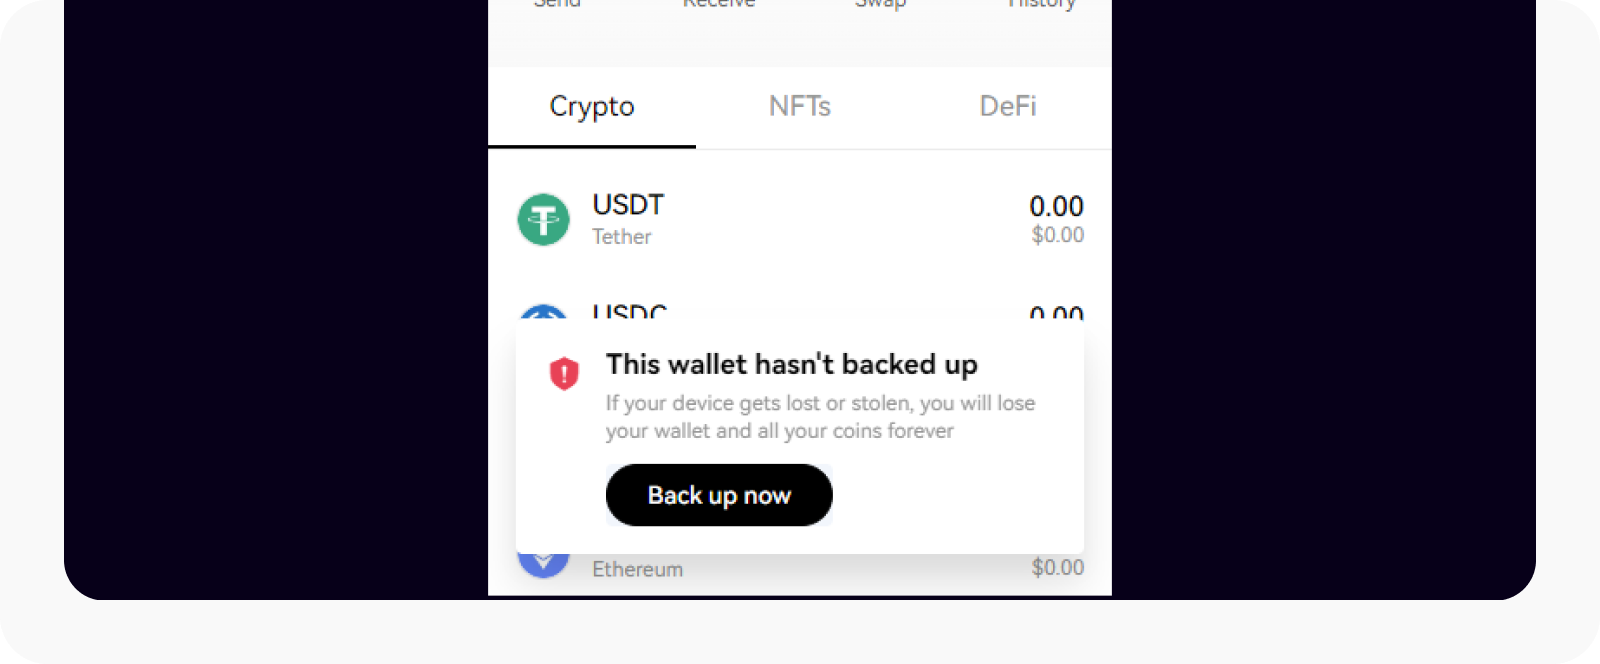 Select Back up now to secure your wallet 